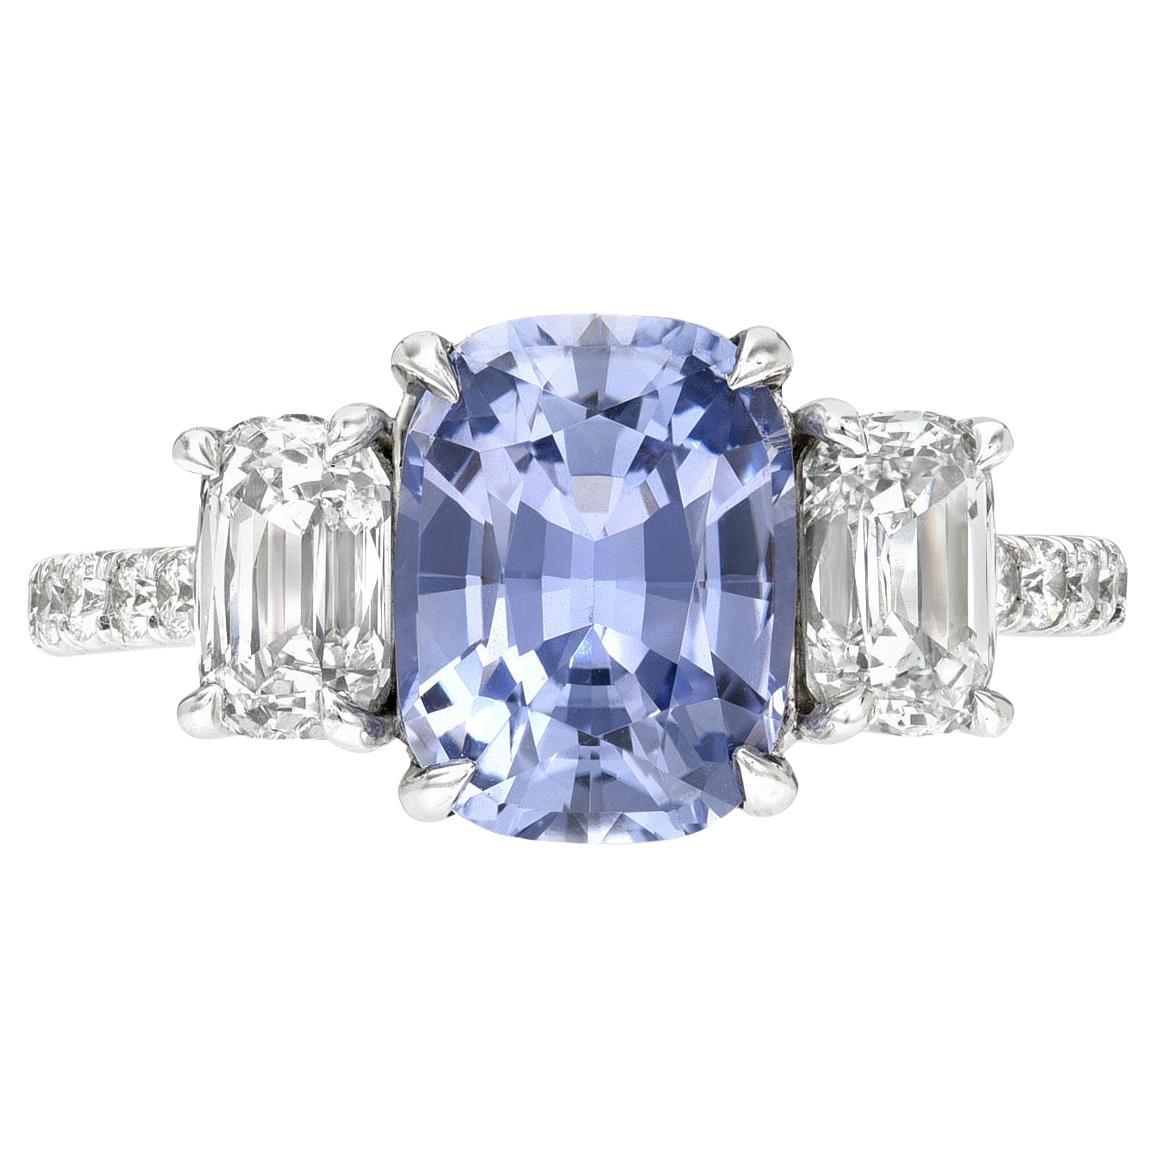 What is the best cut for a Blue Sapphire?